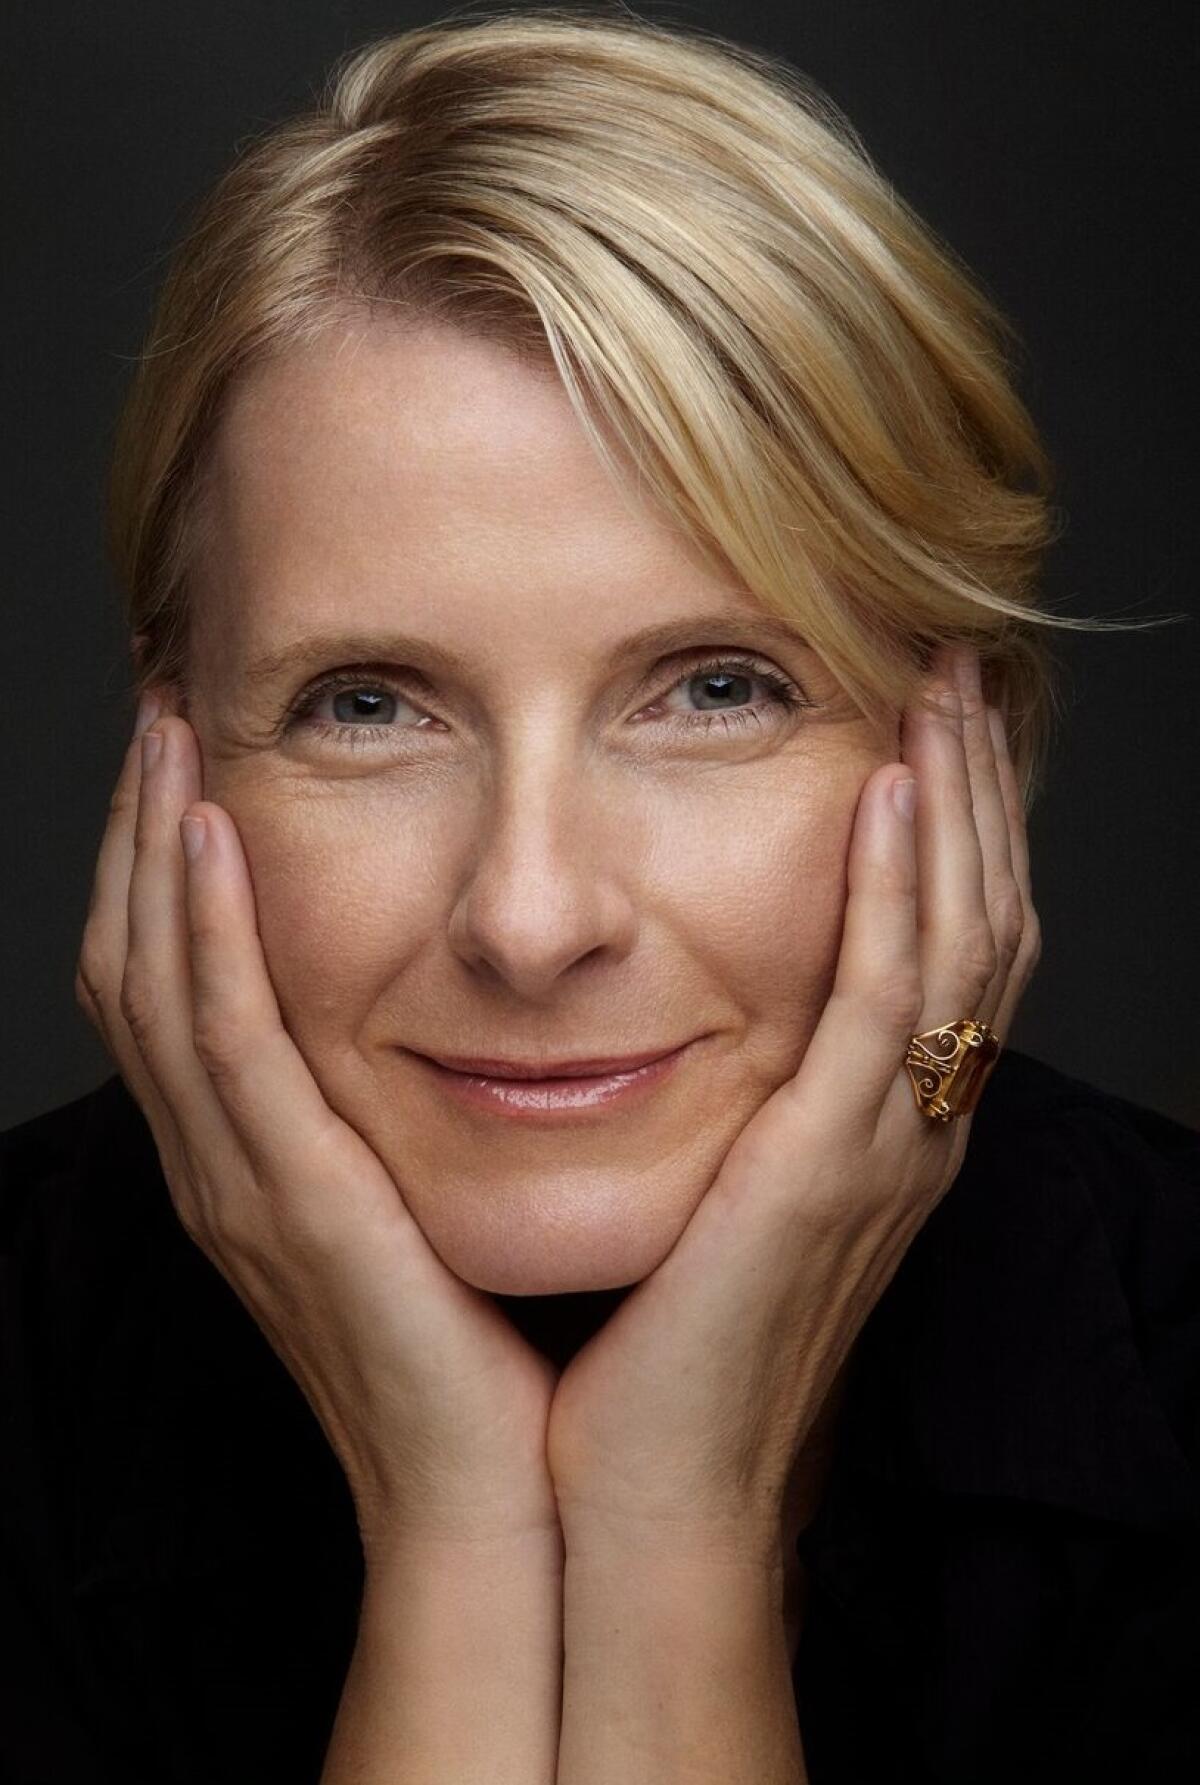 Sharp HealthCare presents the Sharp Women’s Health Conference on April 24 online, featuring author Elizabeth Gilbert.